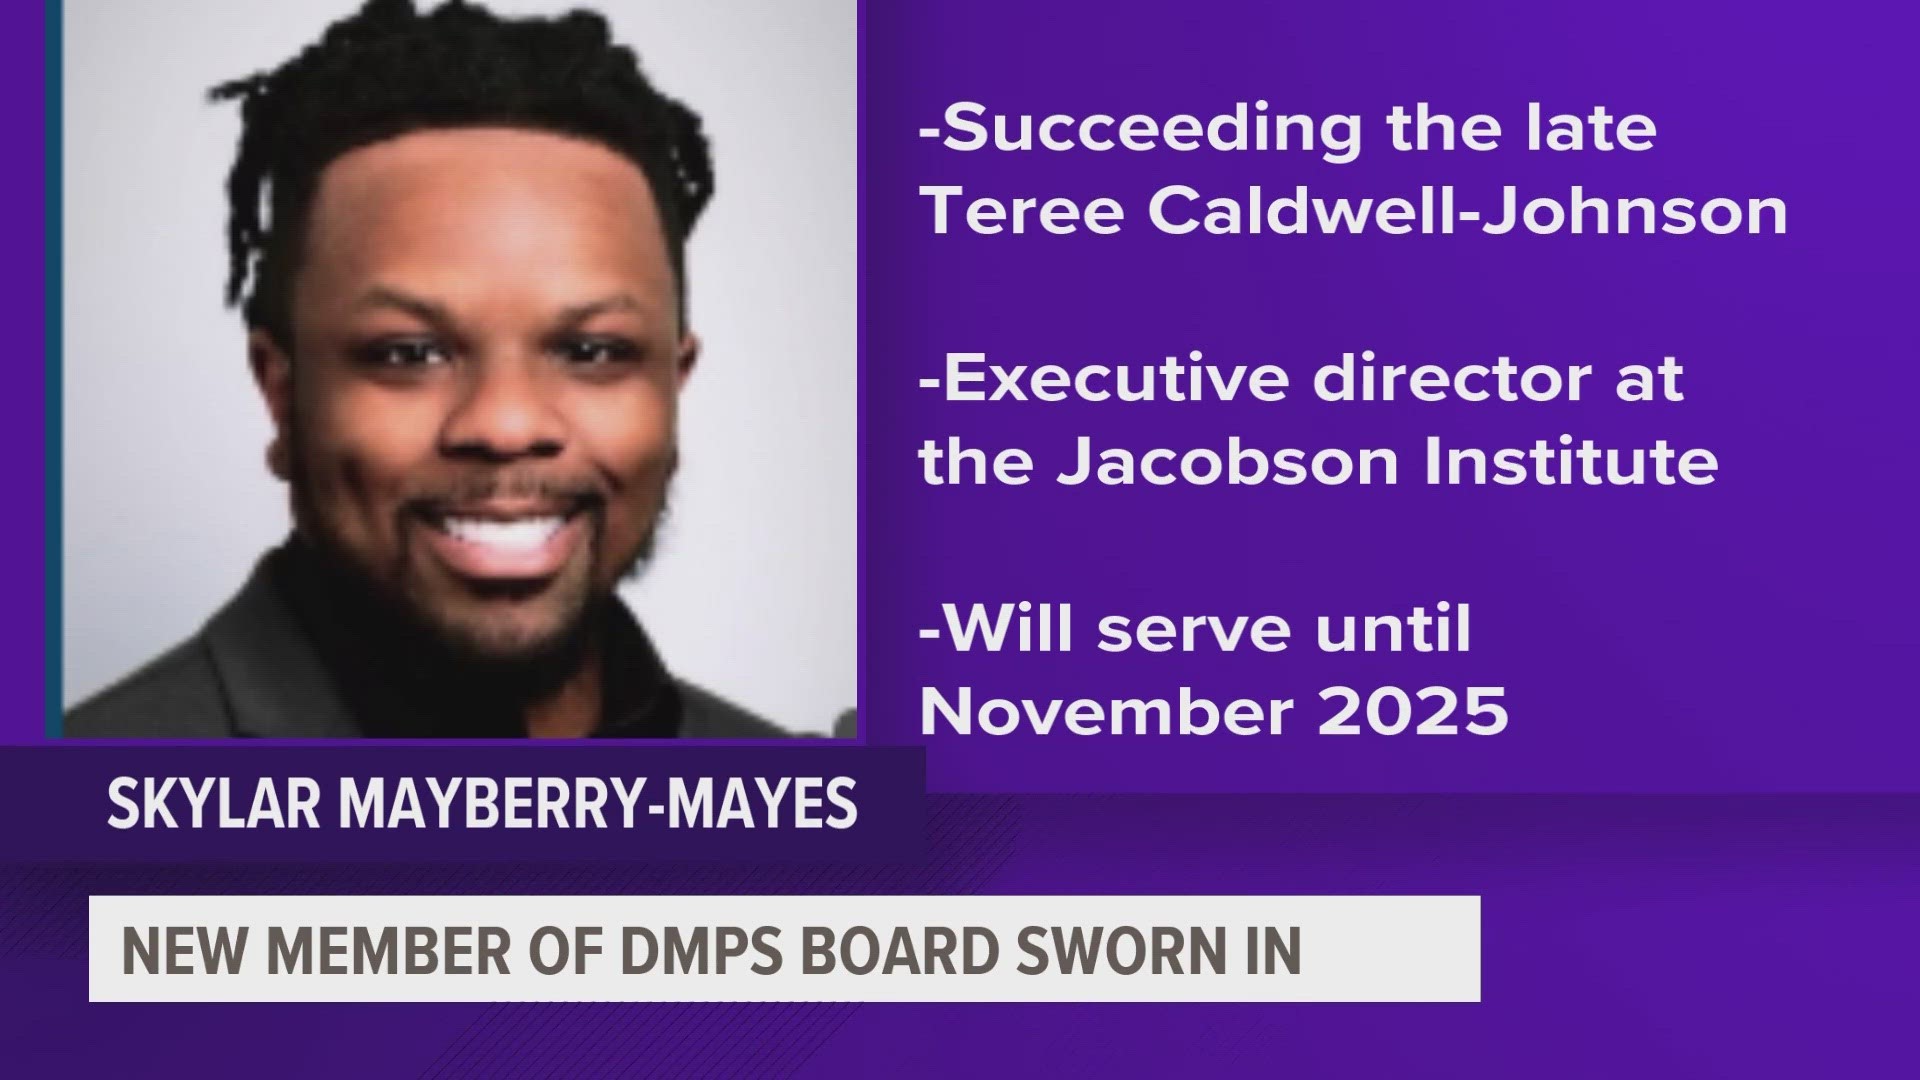 Skylar Mayberry-Mayes will succeed the late Teree Caldwell Johnson.